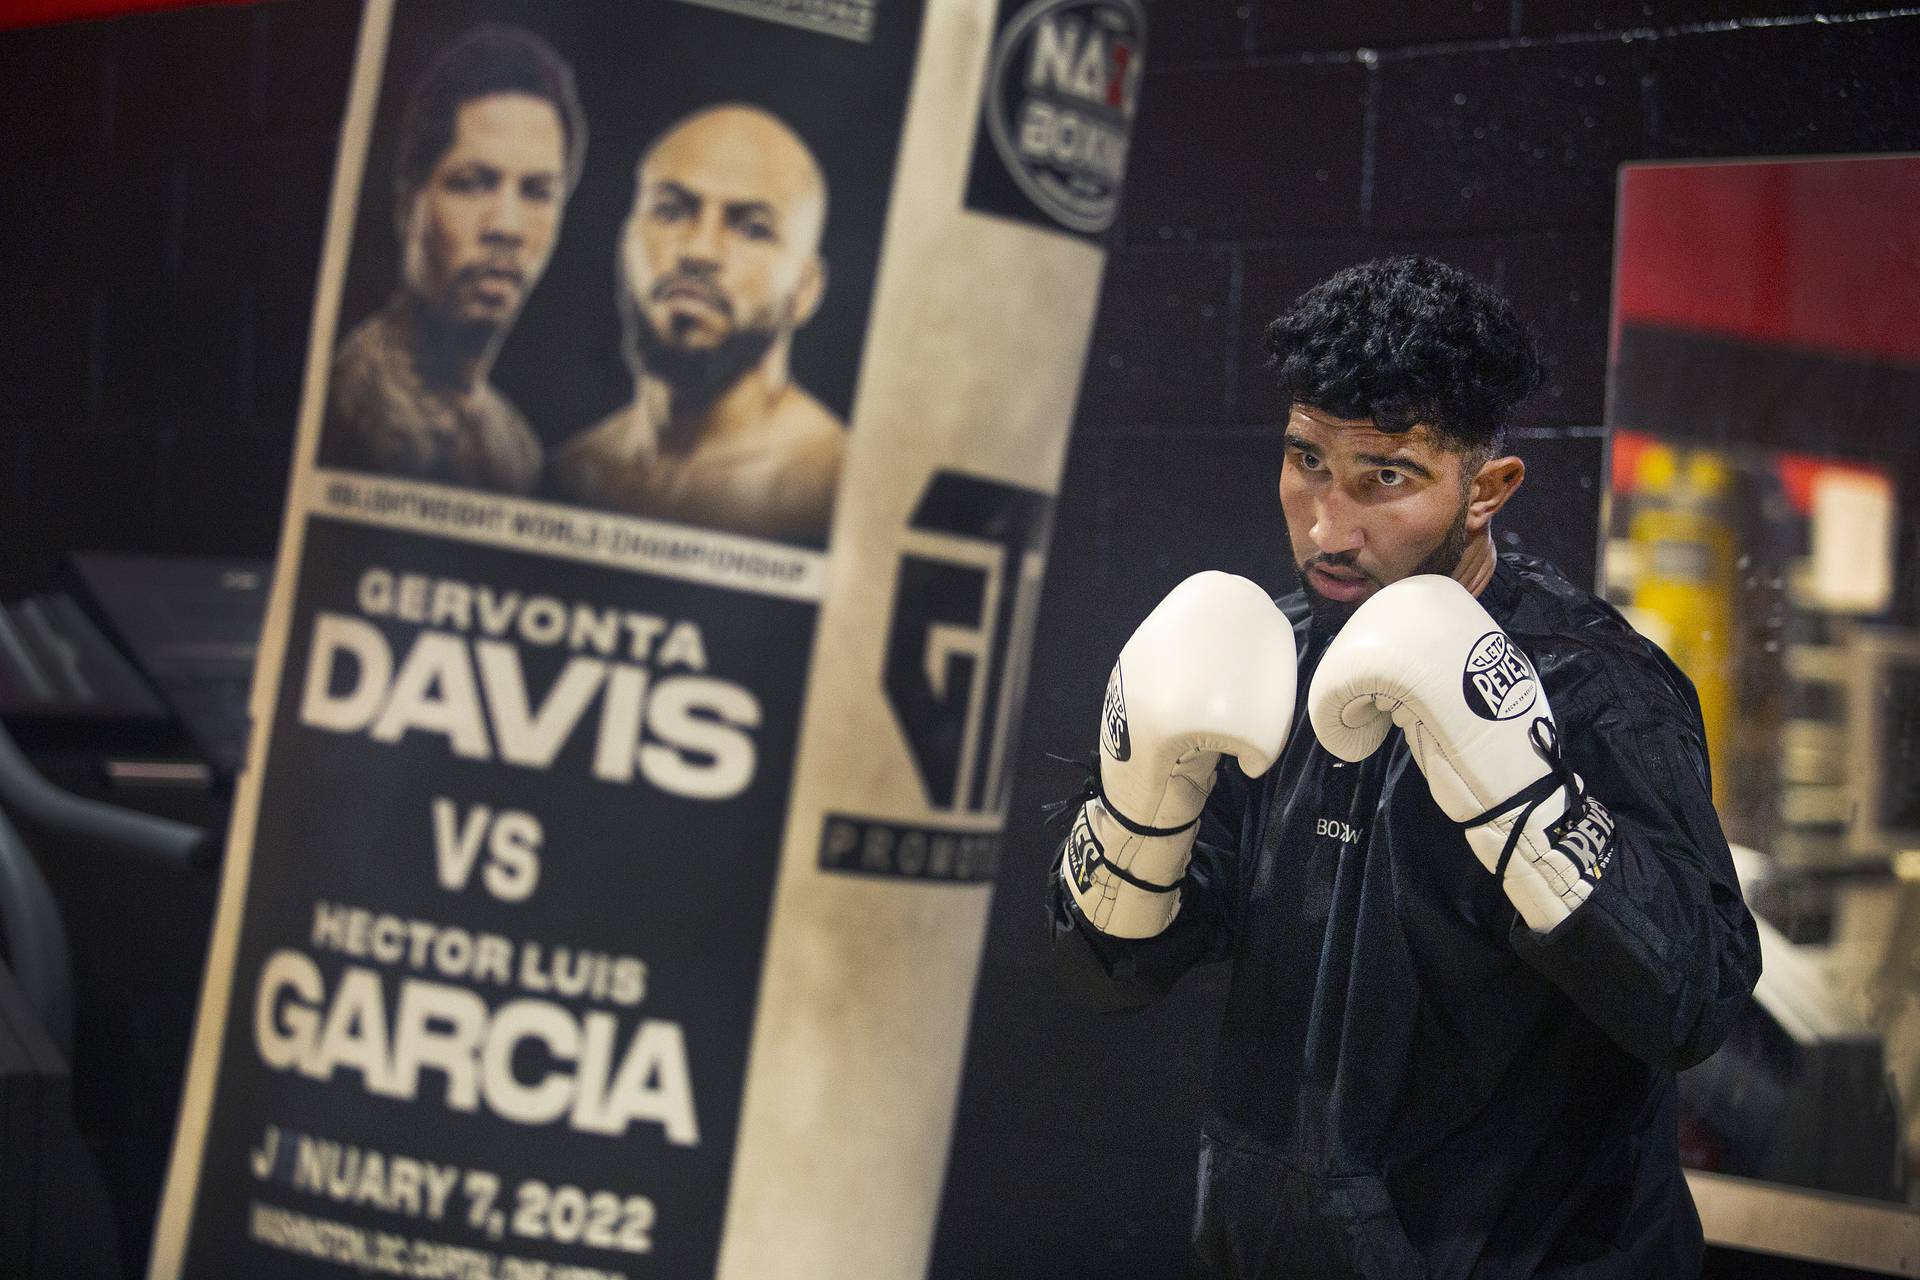 Rafiullah Yari is determined to become world champion and have his image up there in the gyms among the greats, one of which being Upton’s own Gervonta Tank Davis, world champion in three weight classes.